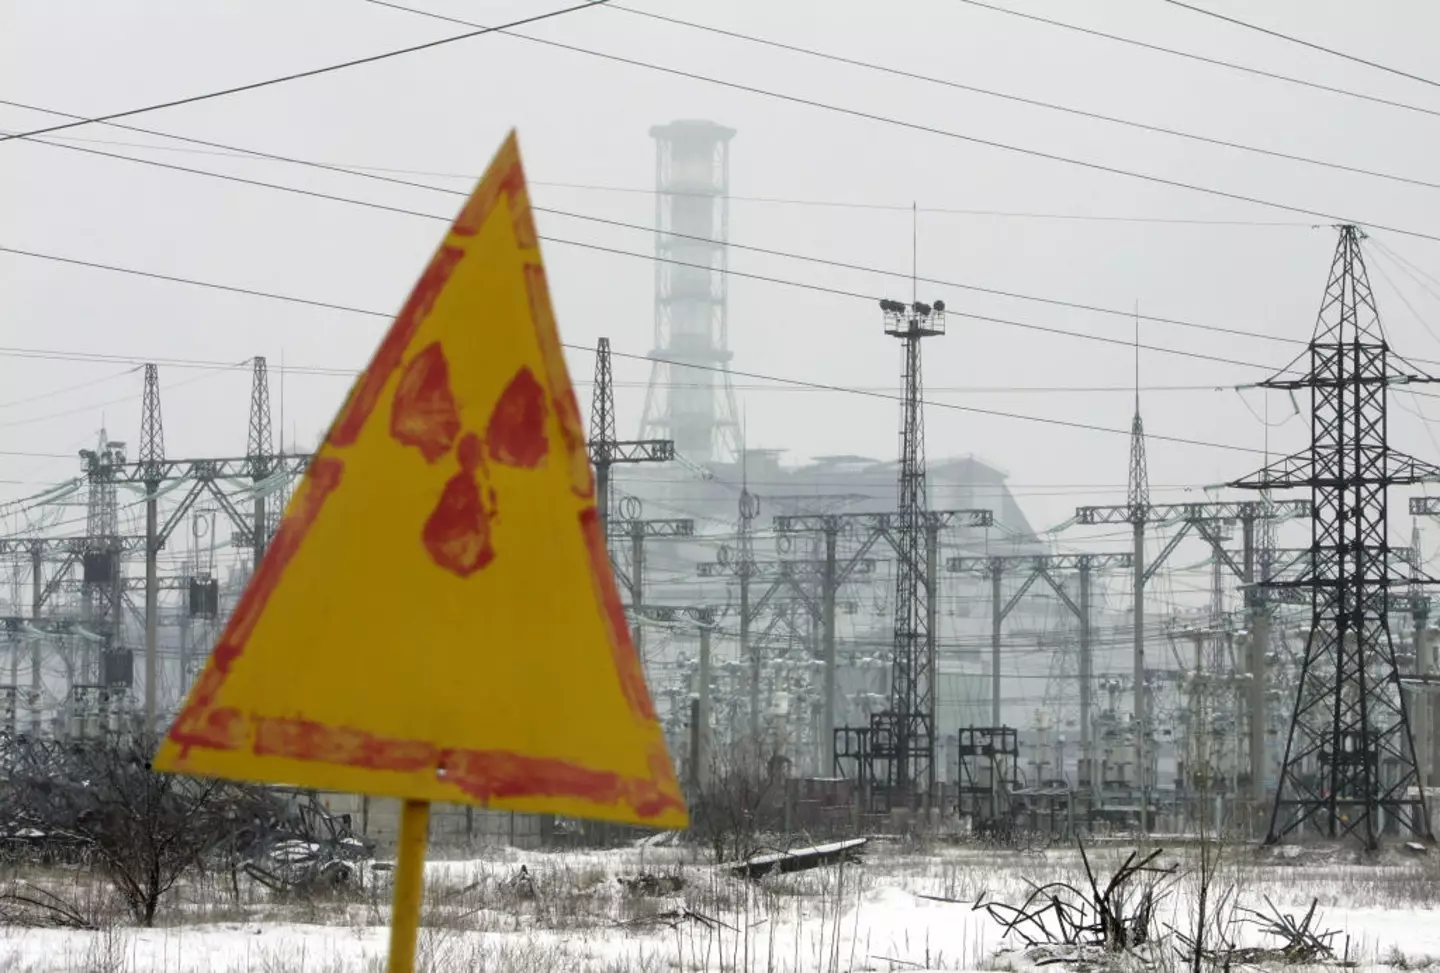 Chernobyl is usually the first to come to mind when thinking about nuclear disasters.